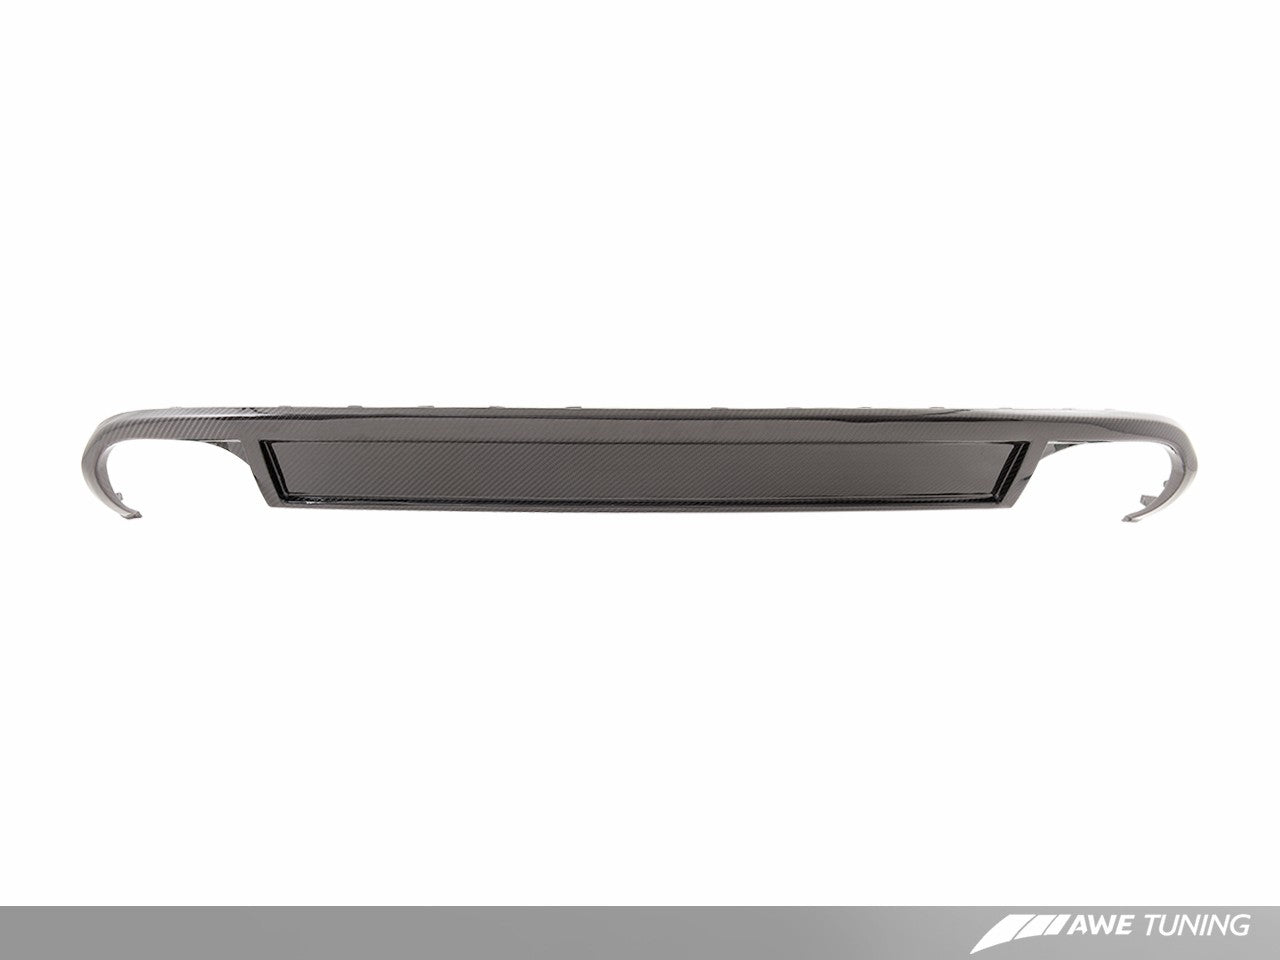 AWE Quad Outlet Bumper Conversion Kit W/ Lower Valance and Trim Strip for B8 A4 2.0T Avant - S-Line Cars